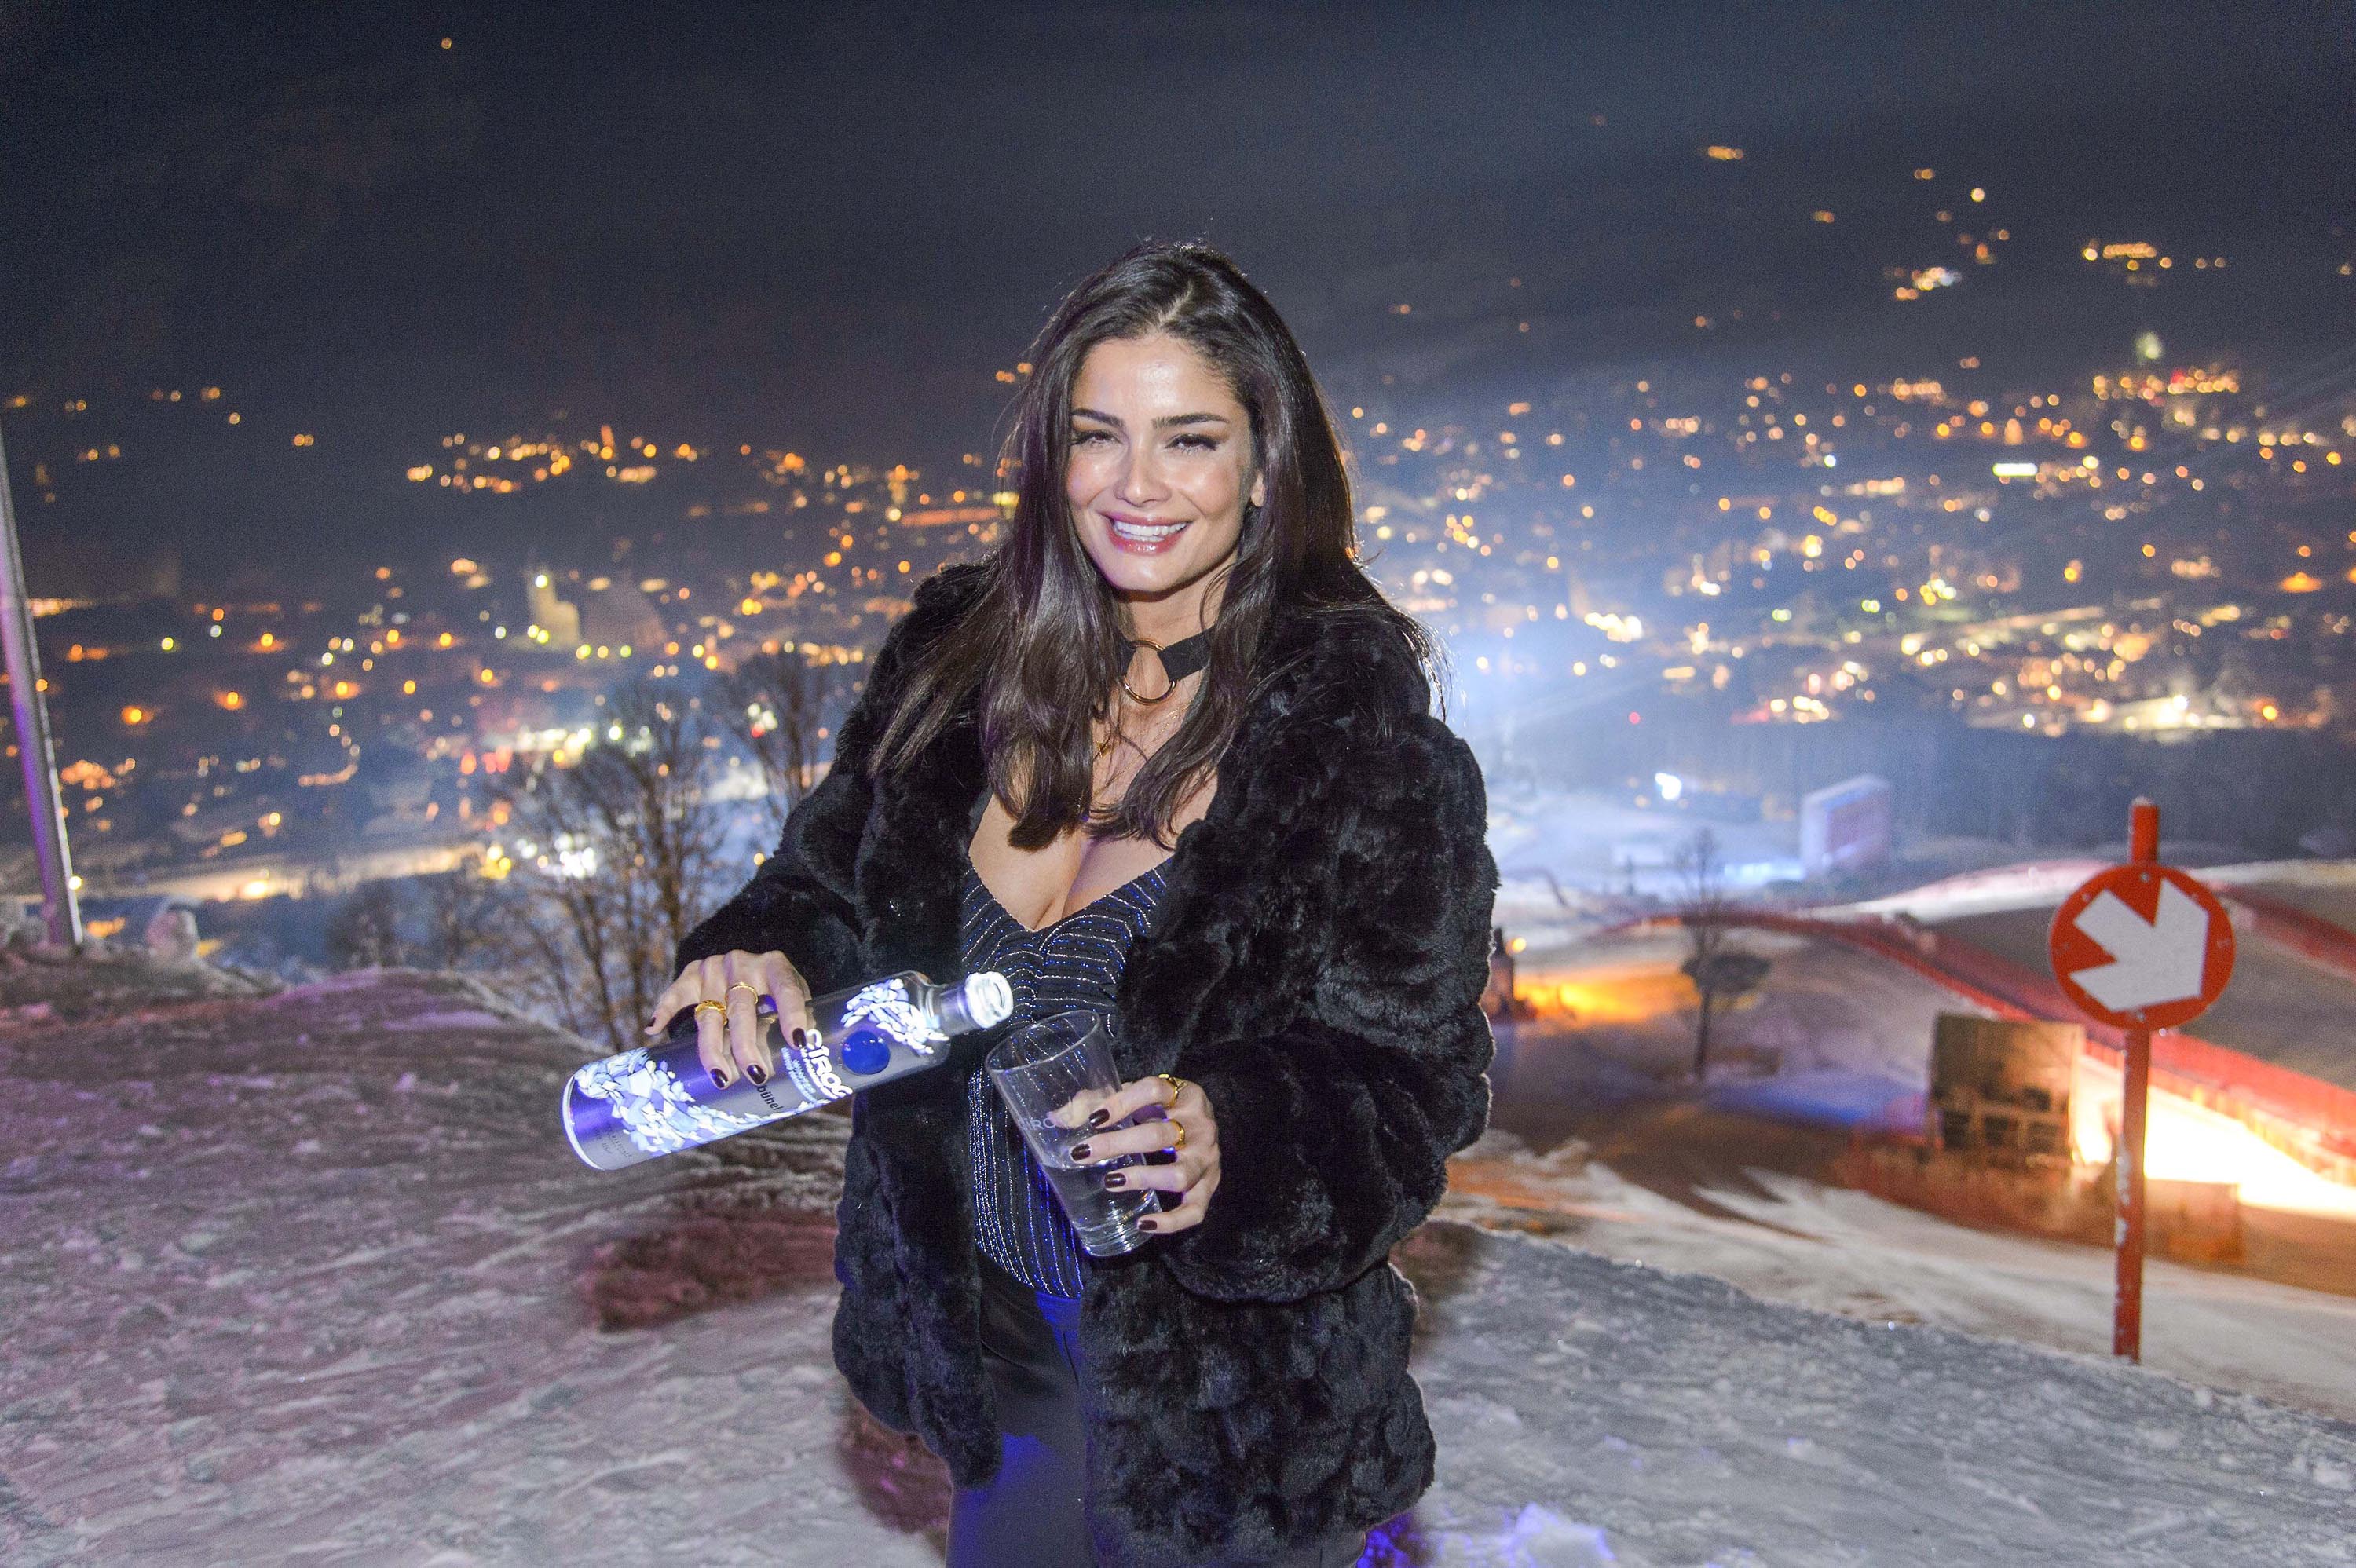 Shermine Shahrivar attends Ciroc on Ice Party 2017